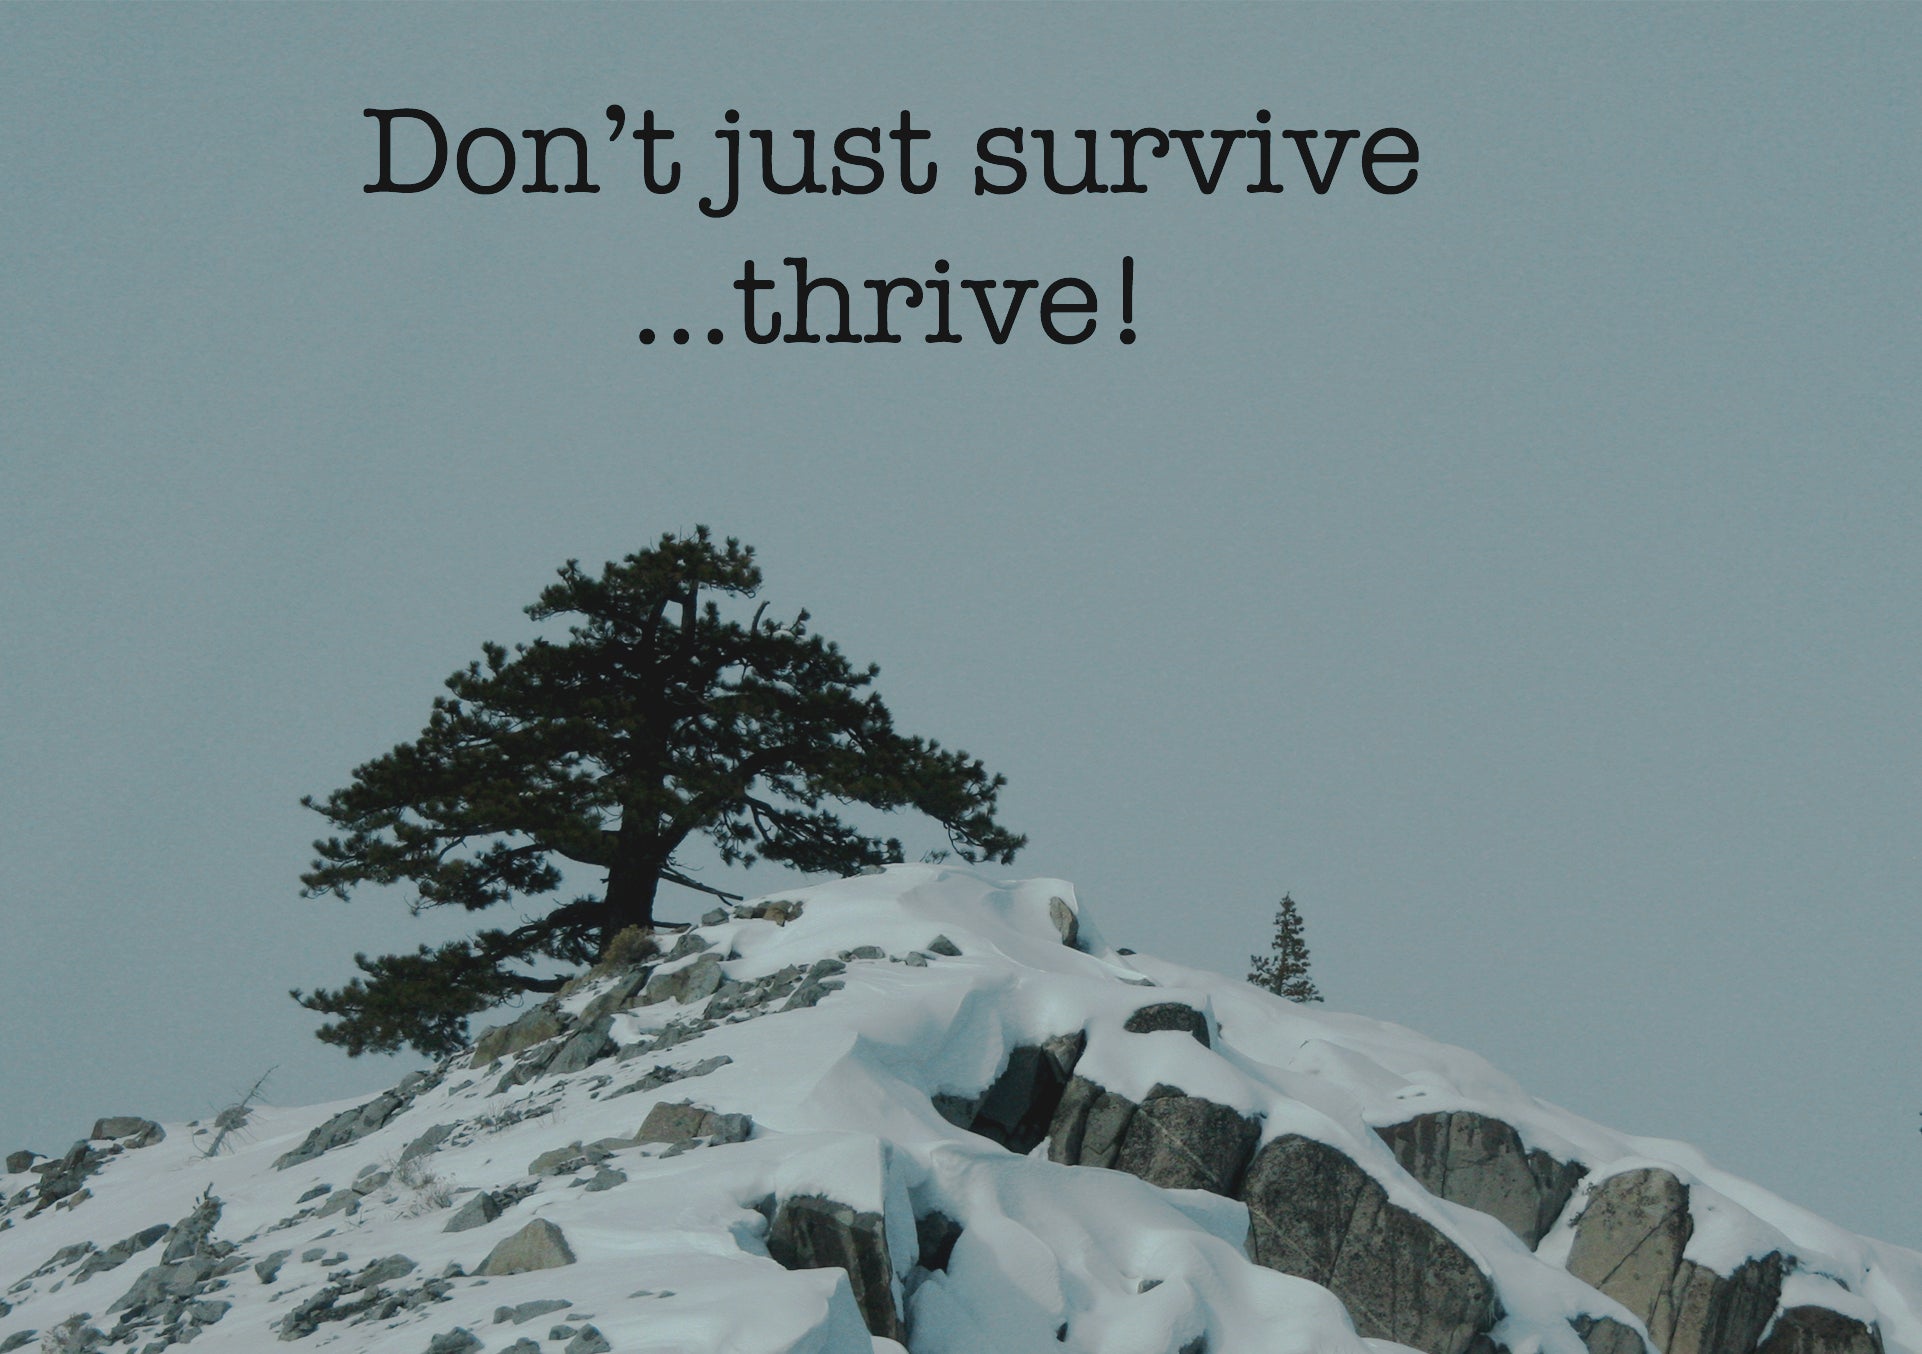 Single pine tree thriving atop a snow capped mountain with the text "Don't just survive...thrive!"